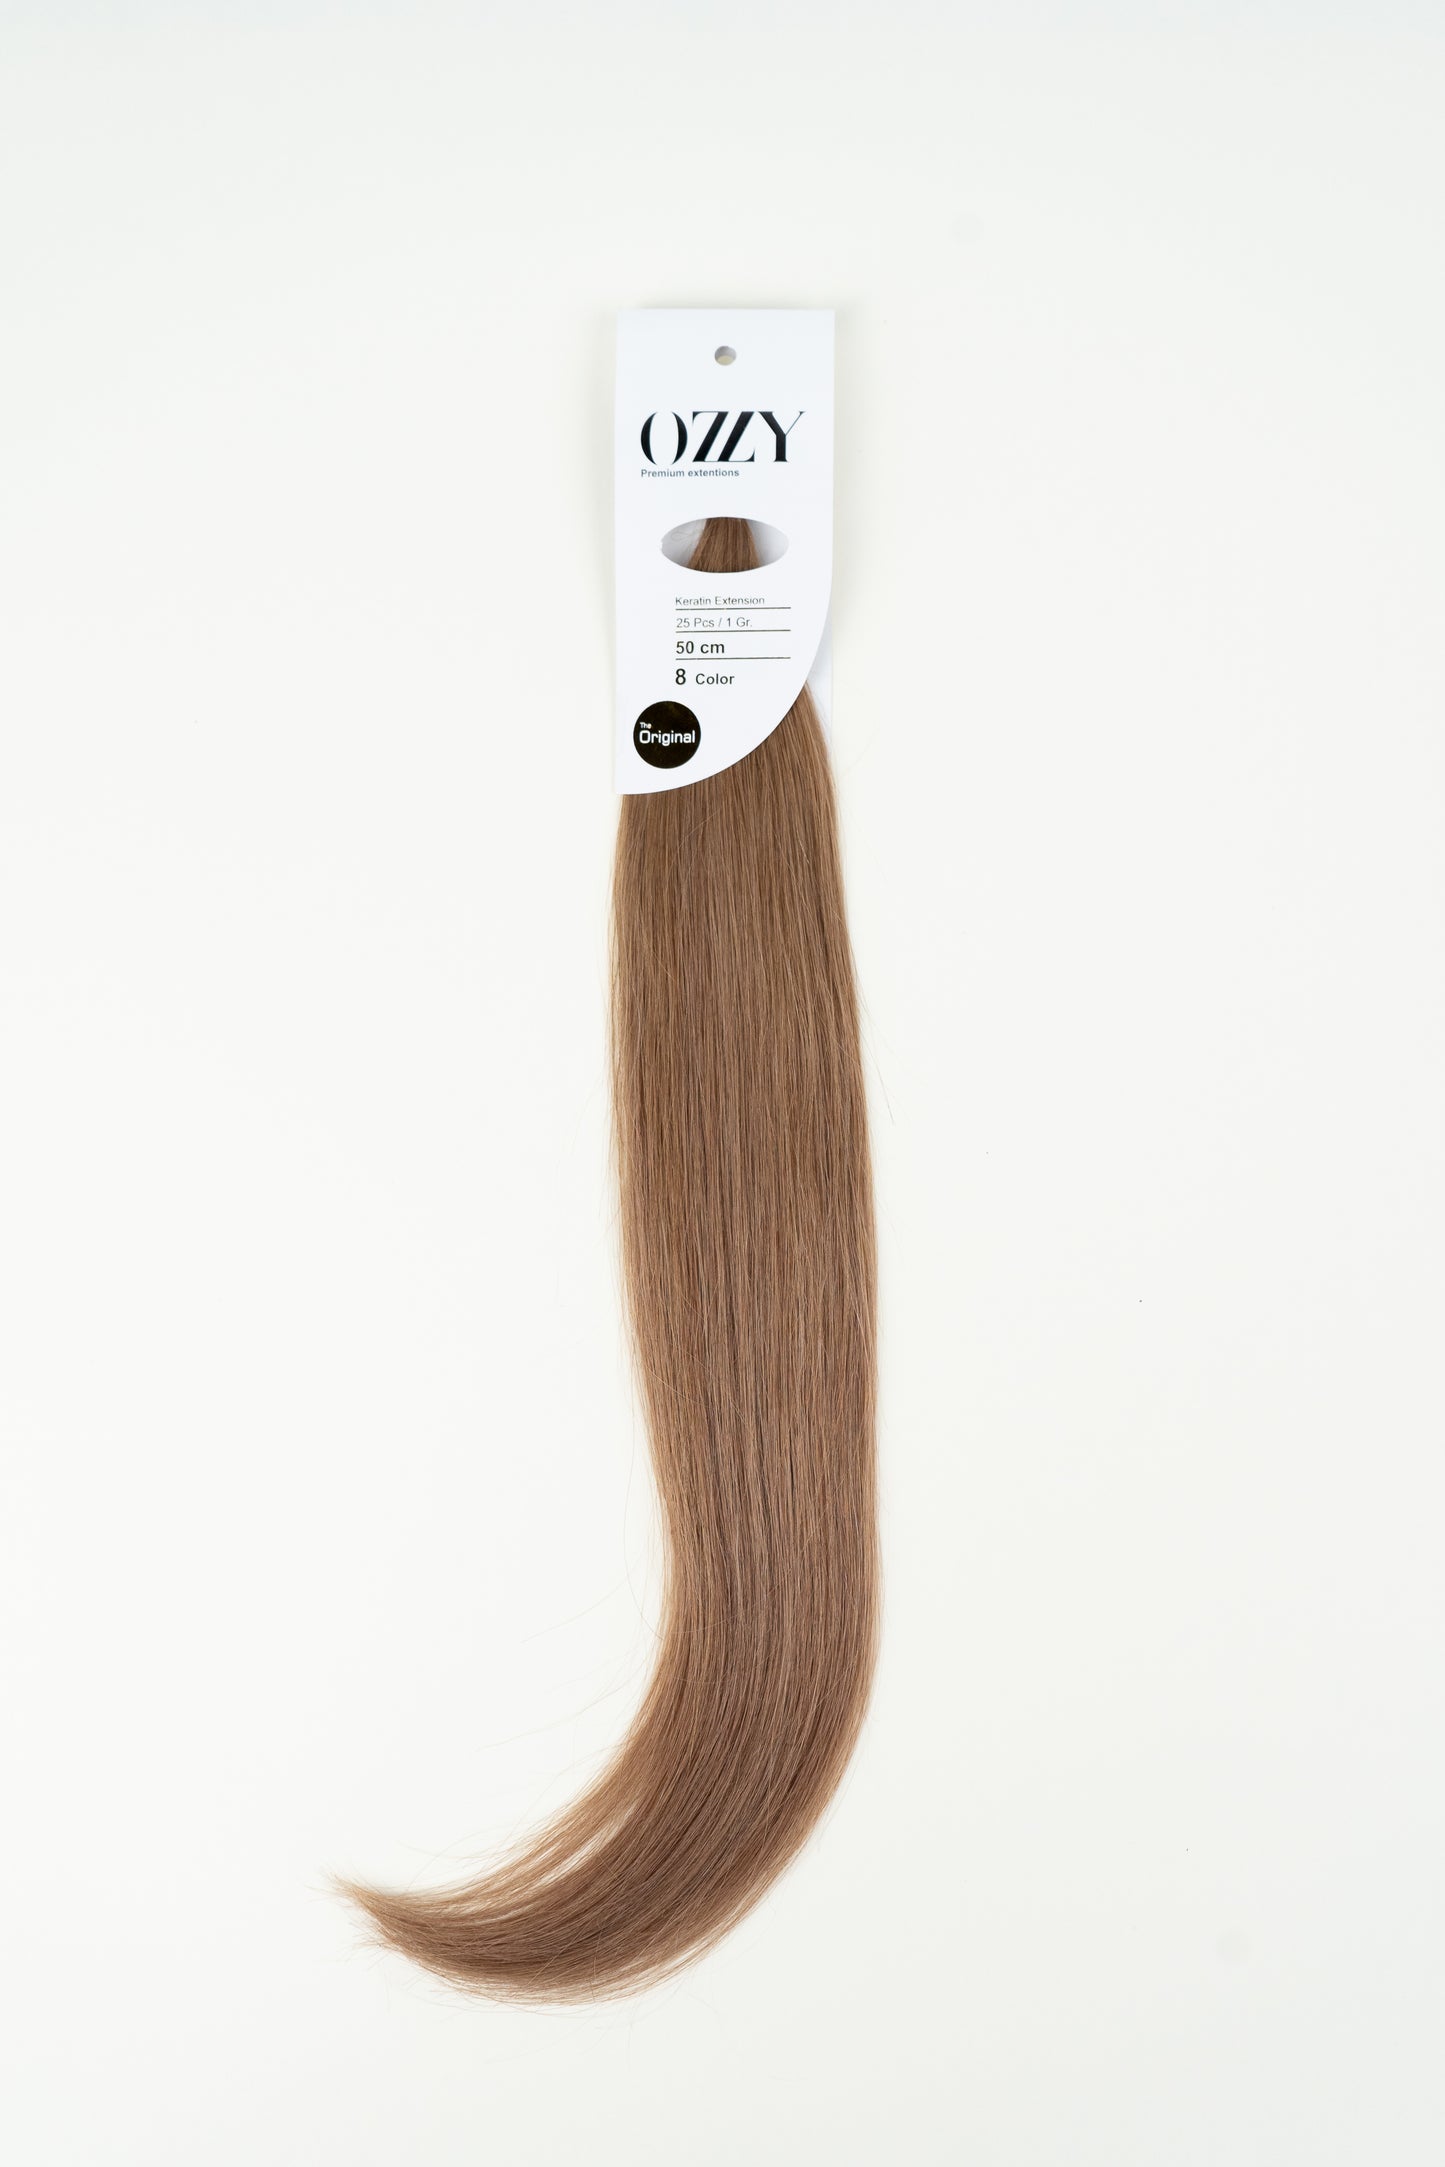 Keratin Extension #8 by Ozzy